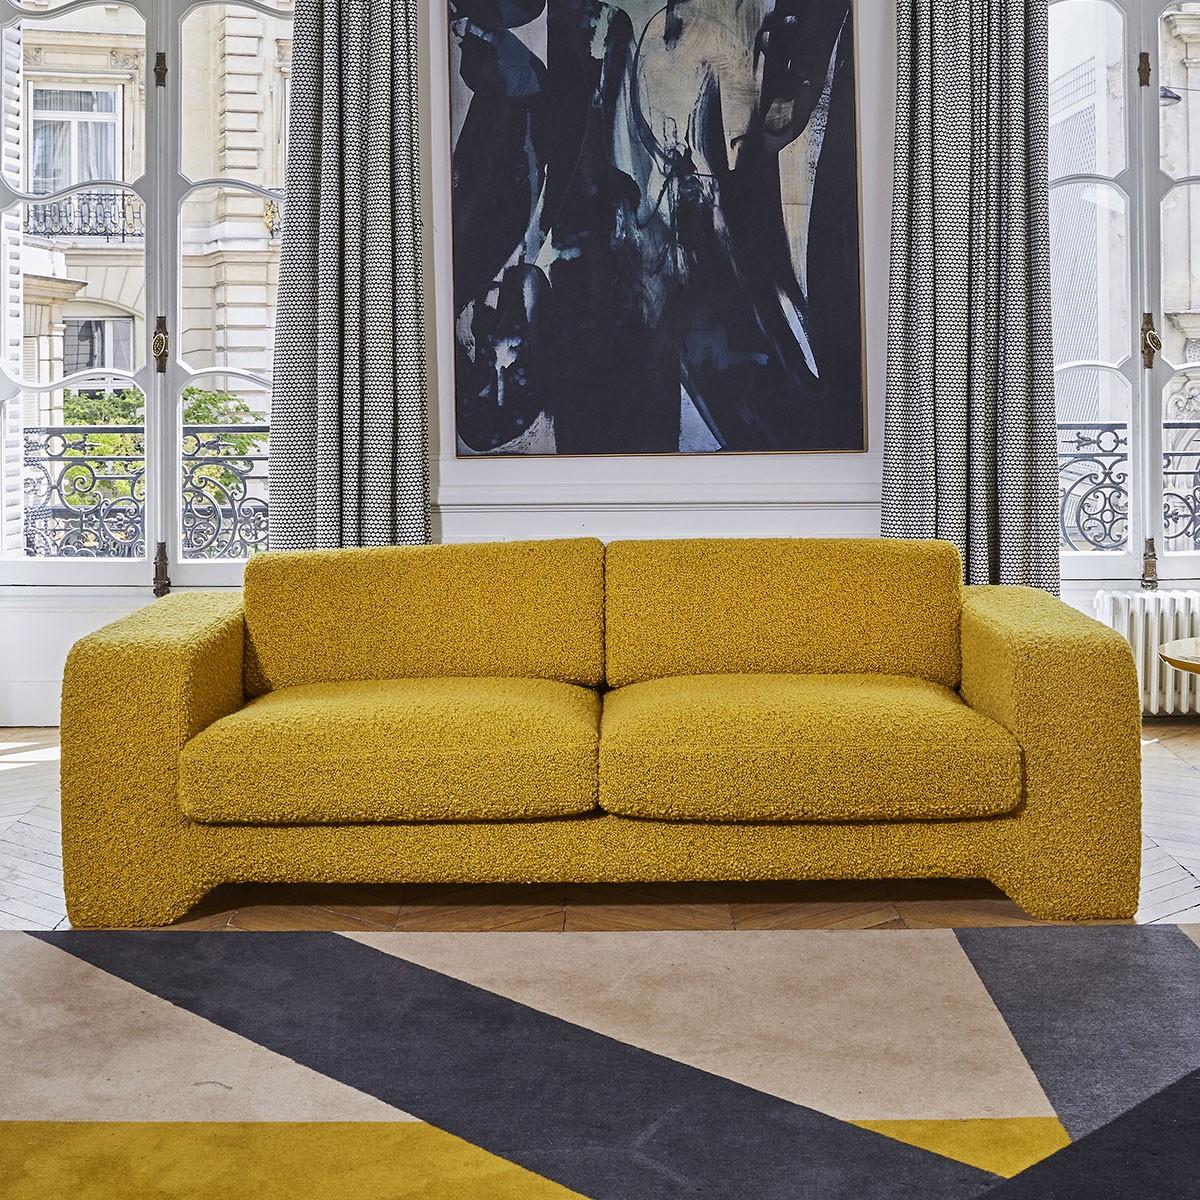 Popus Editions Giovanna 4 seater sofa in Cognac Como Velvet Upholstery

Giovanna is a sofa with a strong profile. A sober, plush line, with this famous detail that changes everything, so as not to forget its strength of character and this charming